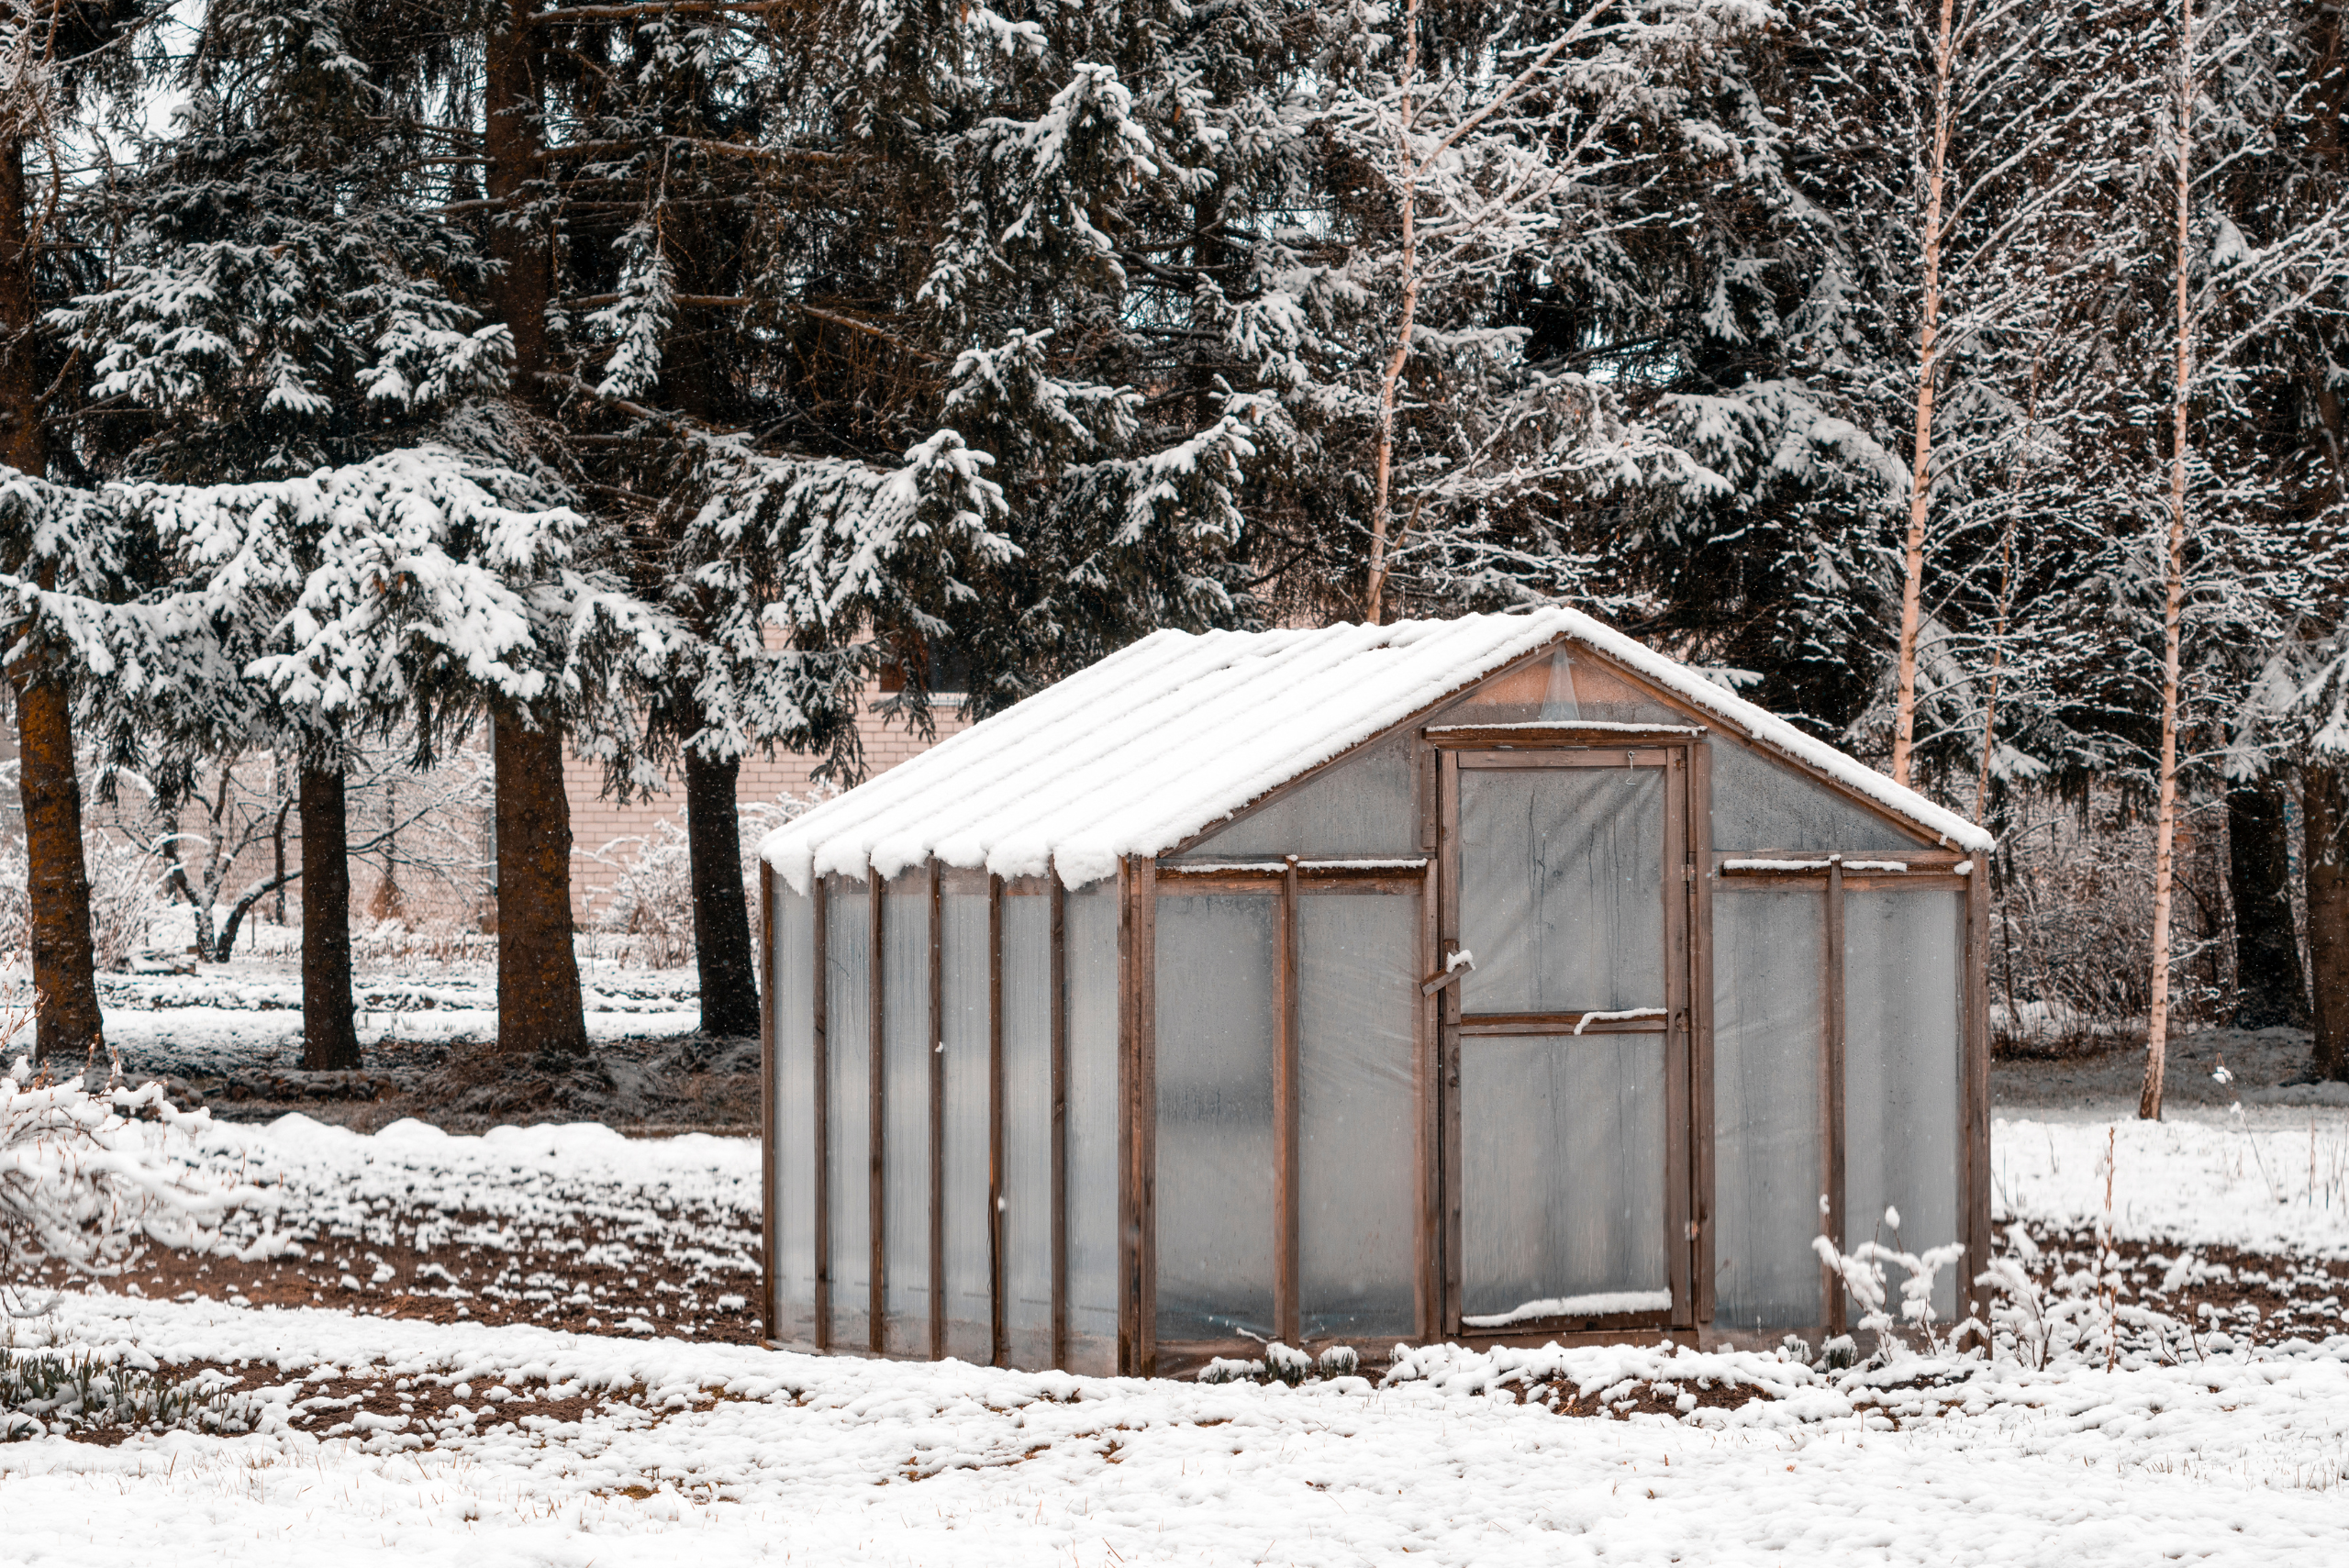 Greenhouse covered in snow.